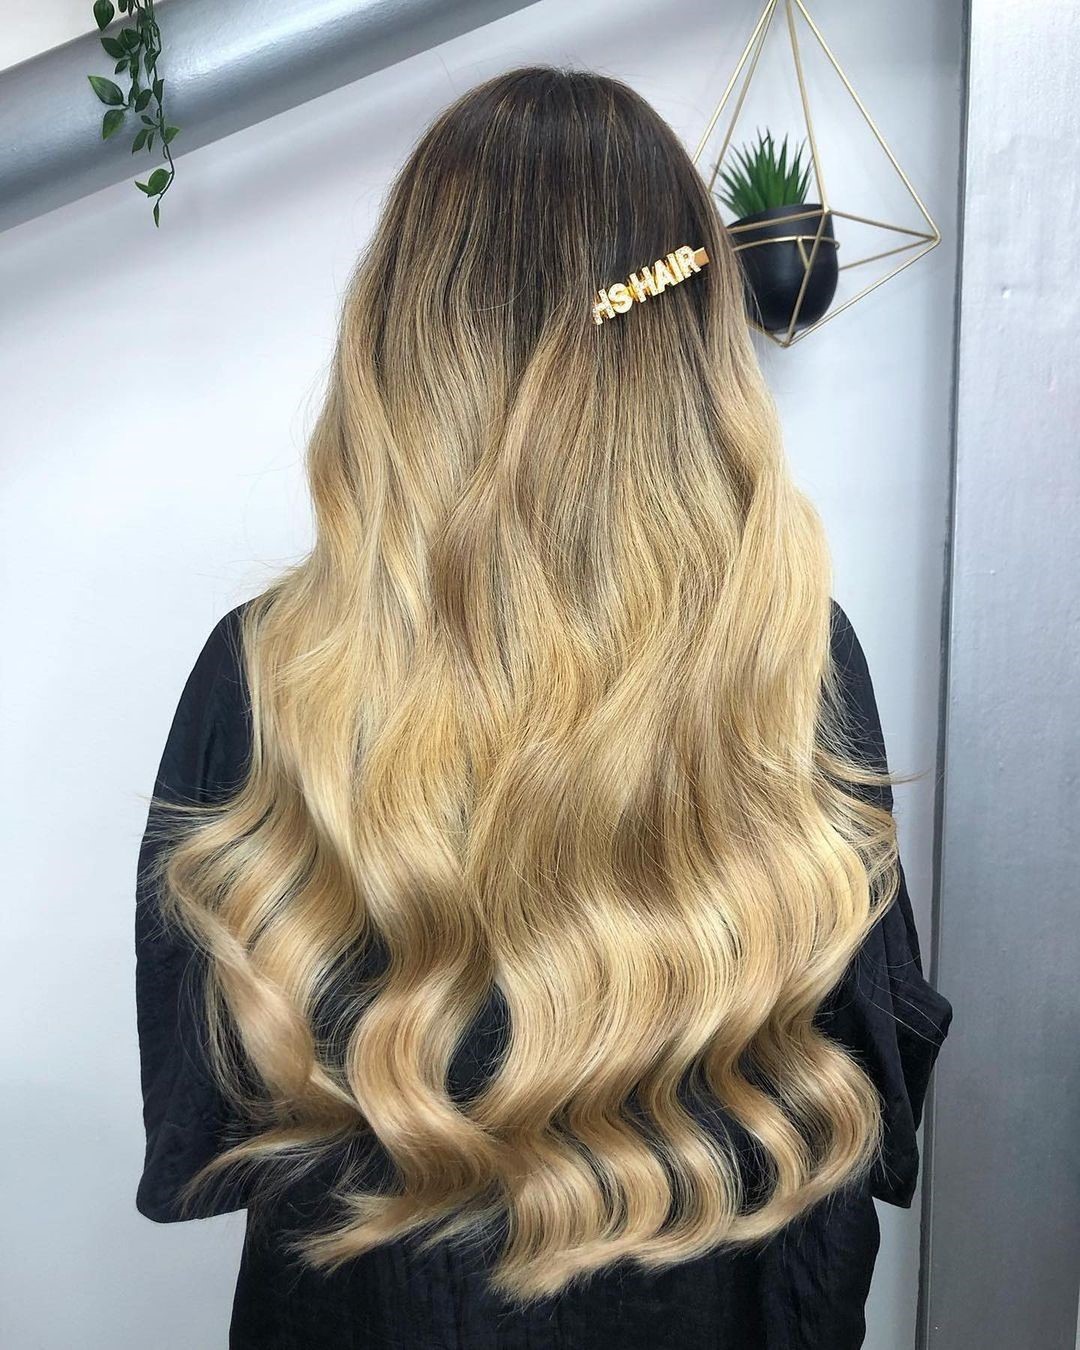 ClipHair Extensions (@Cliphairlimited) / Twitter